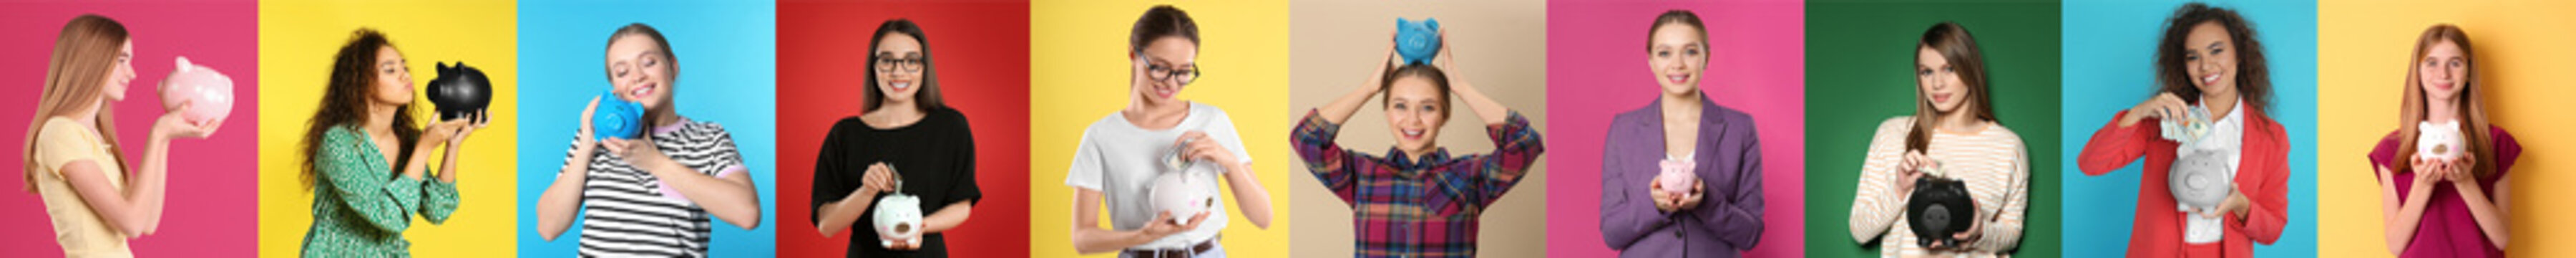 Collage with photos of women holding piggy banks on different color backgrounds. Banner design